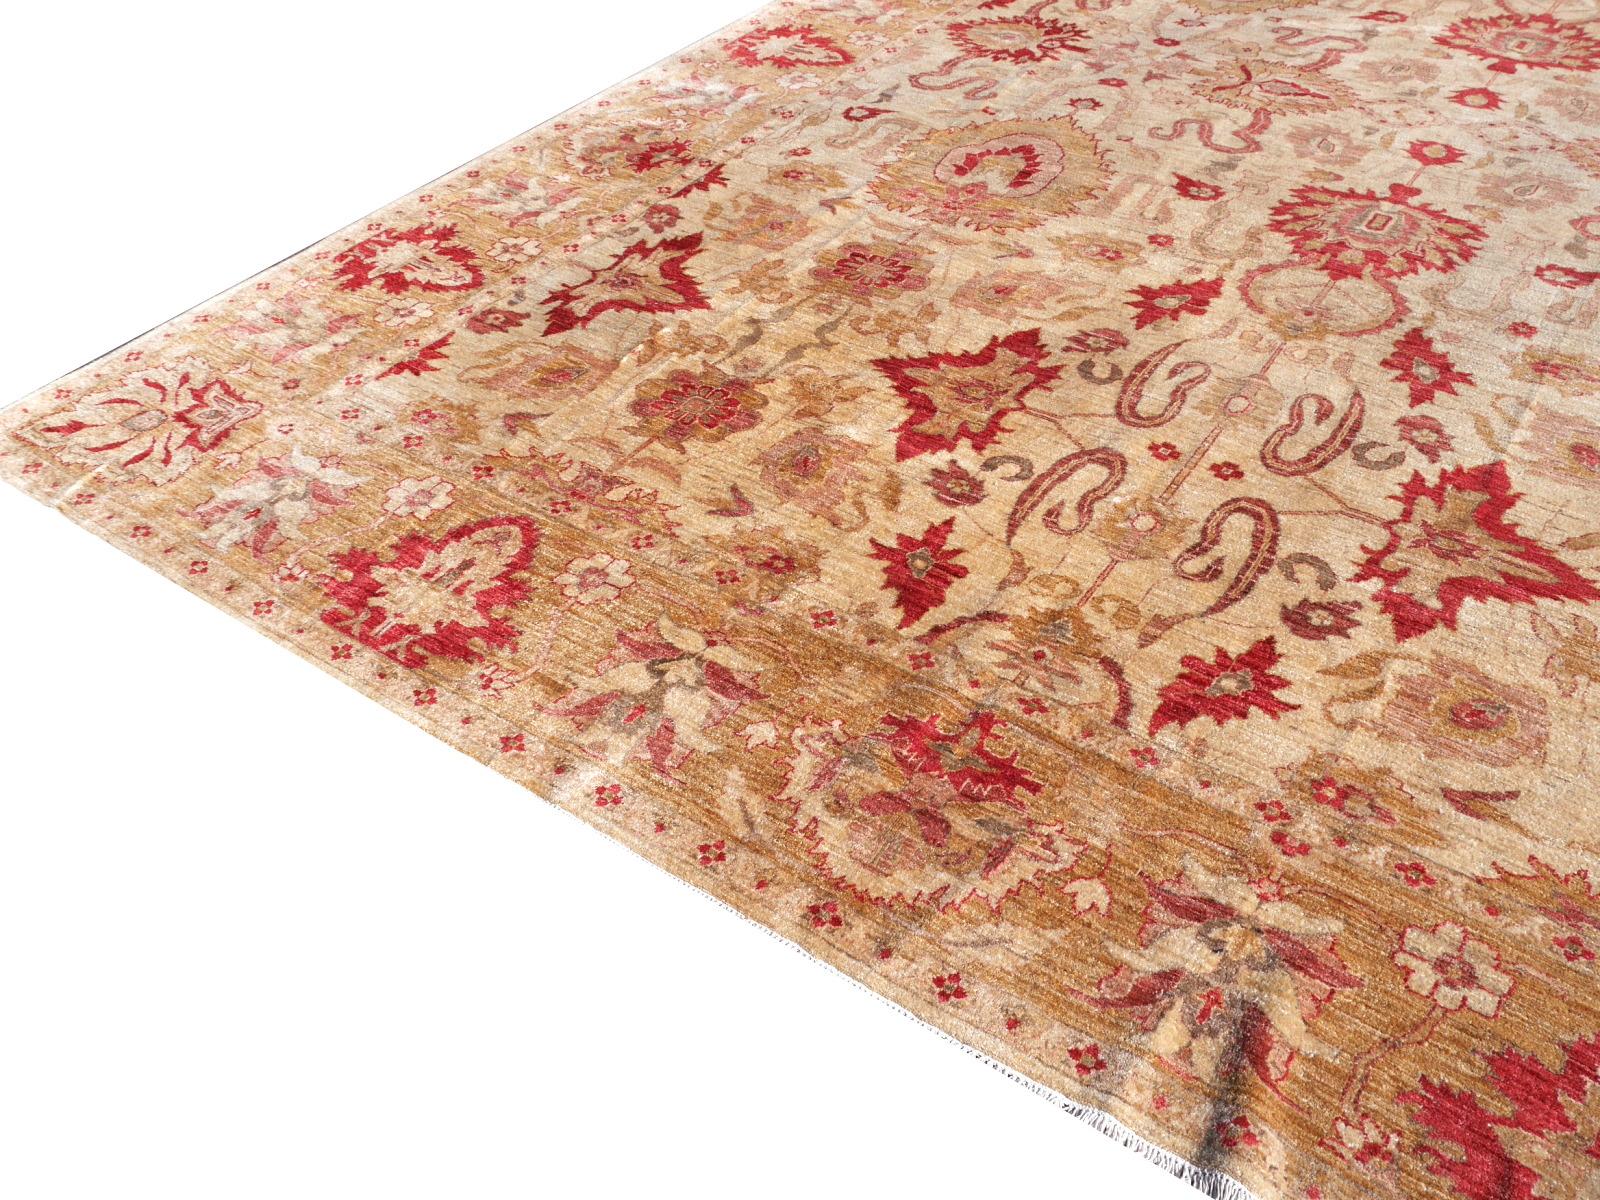 Oushak 18 x 13 ft Rug in Style of Farahan Ziegler Oversized Hand-Knotted 550 x 400 cm For Sale